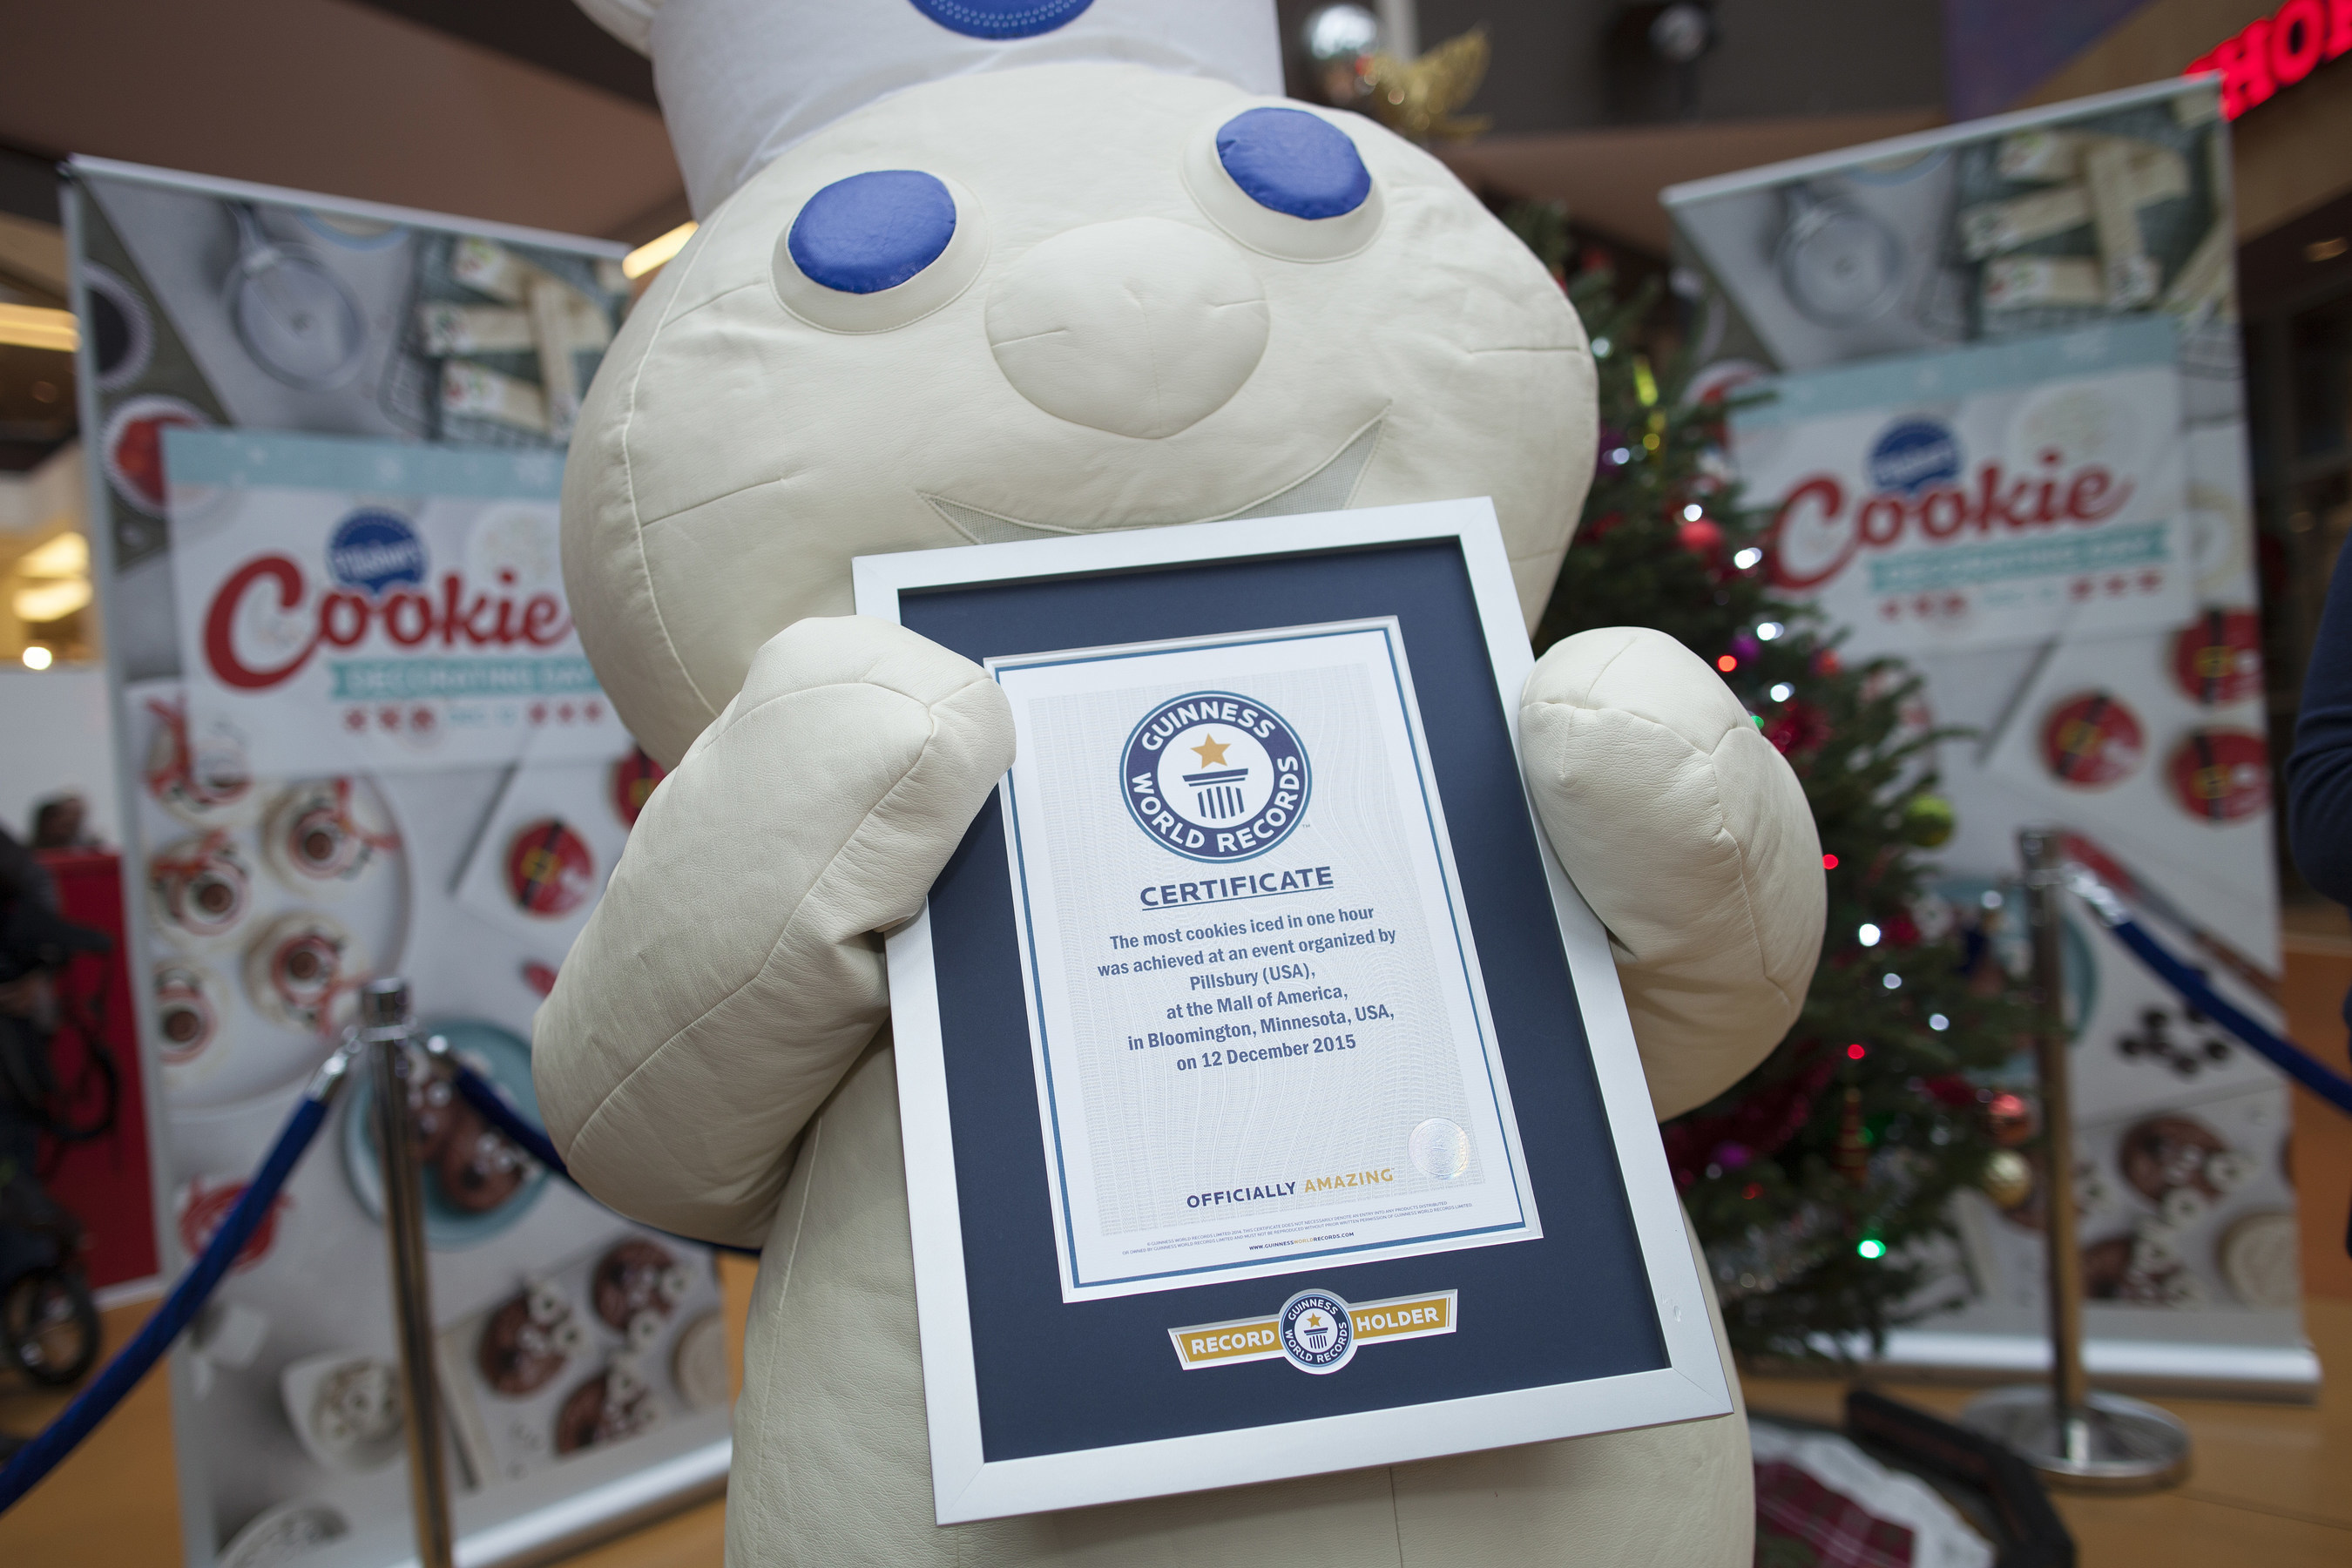 Pillsbury(TM) sets GUINNESS WORLD RECORDS(R) title for 'Most cookies/biscuits iced in one hour' in celebration of first ever National Cookie Decorating Day